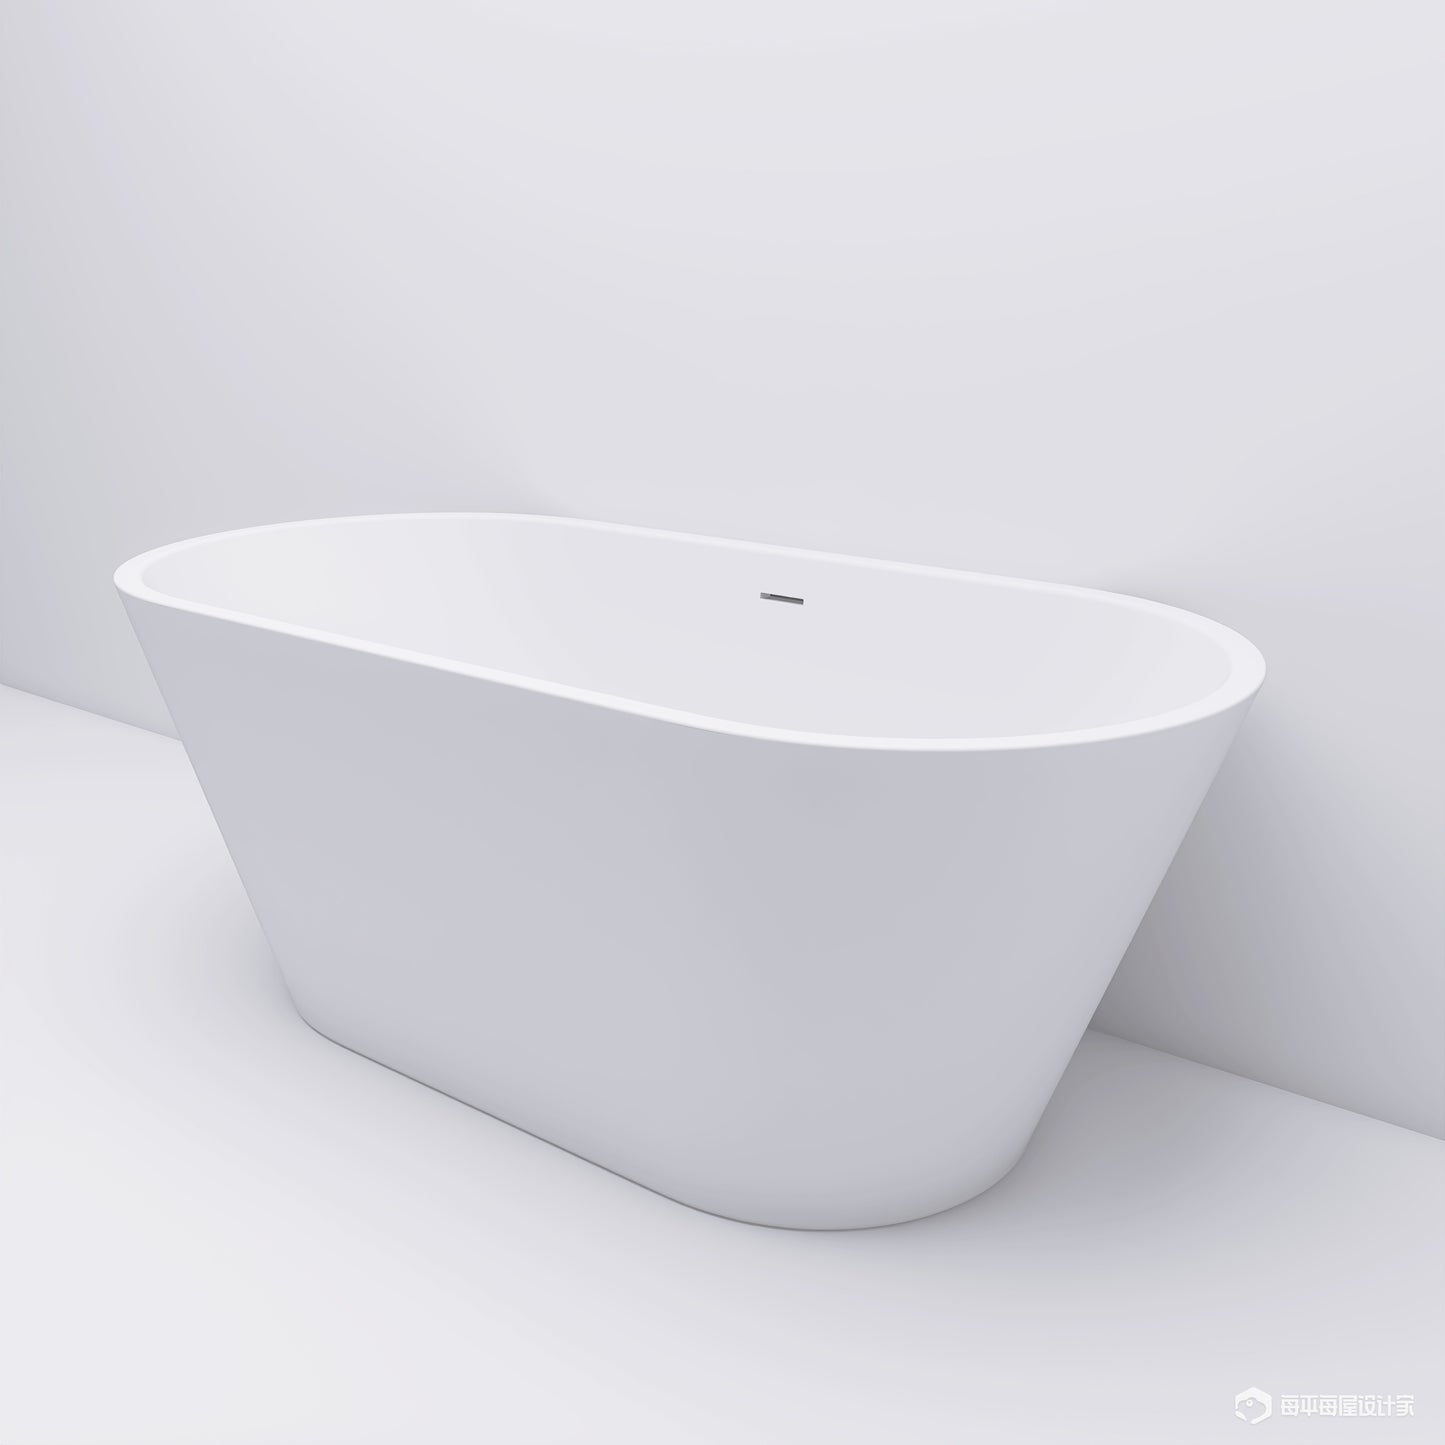 67" Acrylic Free Standing Tub - Classic Oval Shape Soaking Tub, Adjustable Freestanding Bathtub with Integrated Slotted Overflow and Chrome Pop-up Drain Anti-clogging Gloss White